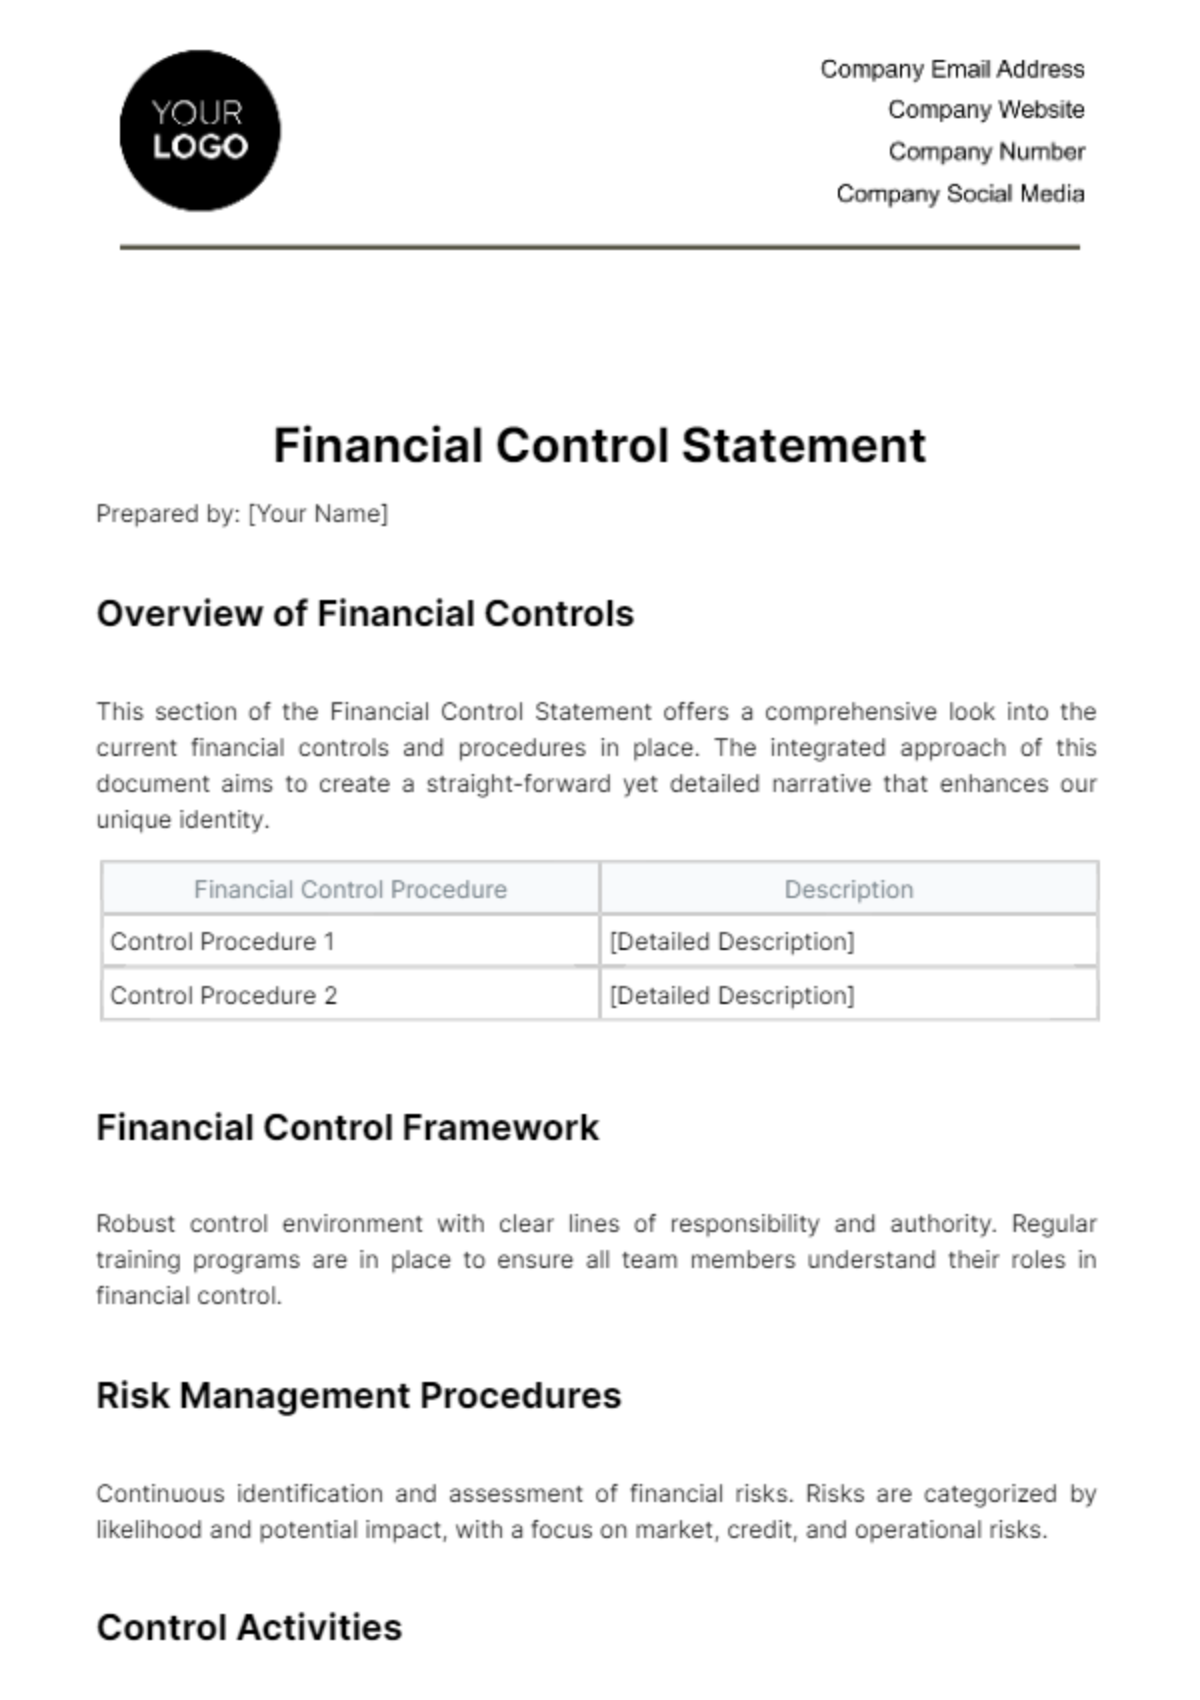 Financial Control Statement Template